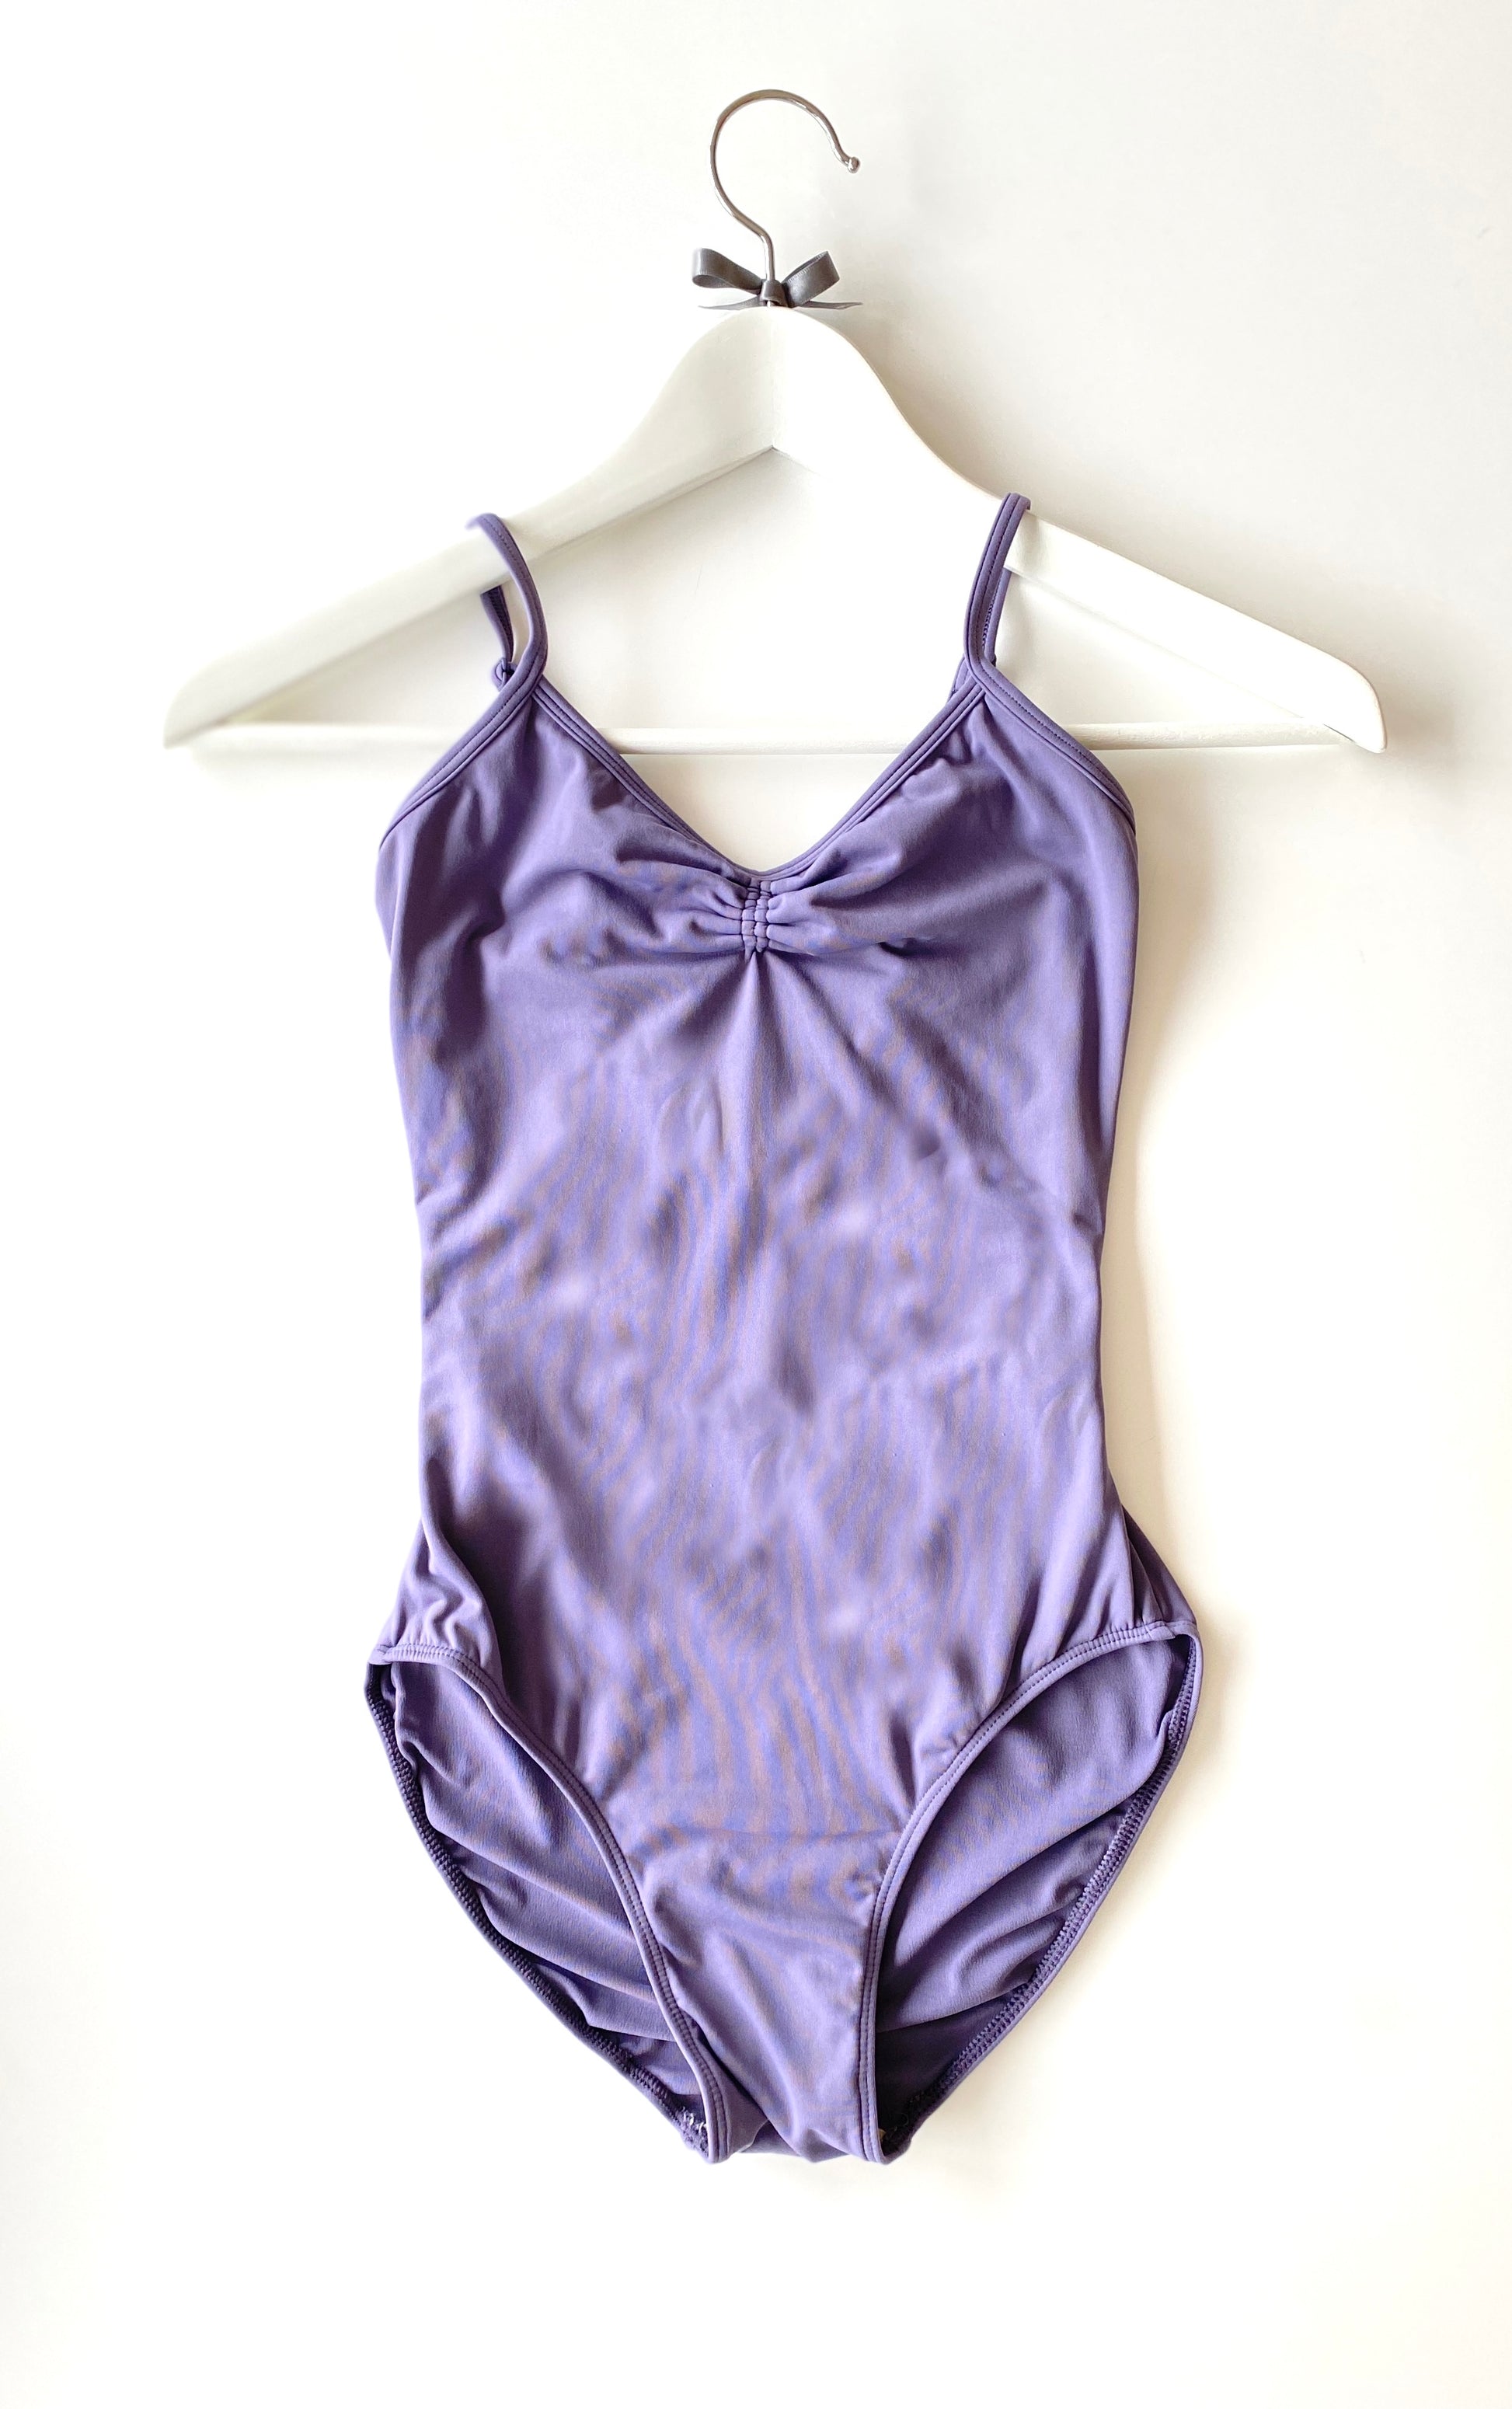 The Classic Camisole with Lace Bow Back - Plum from The Collective Dancewear